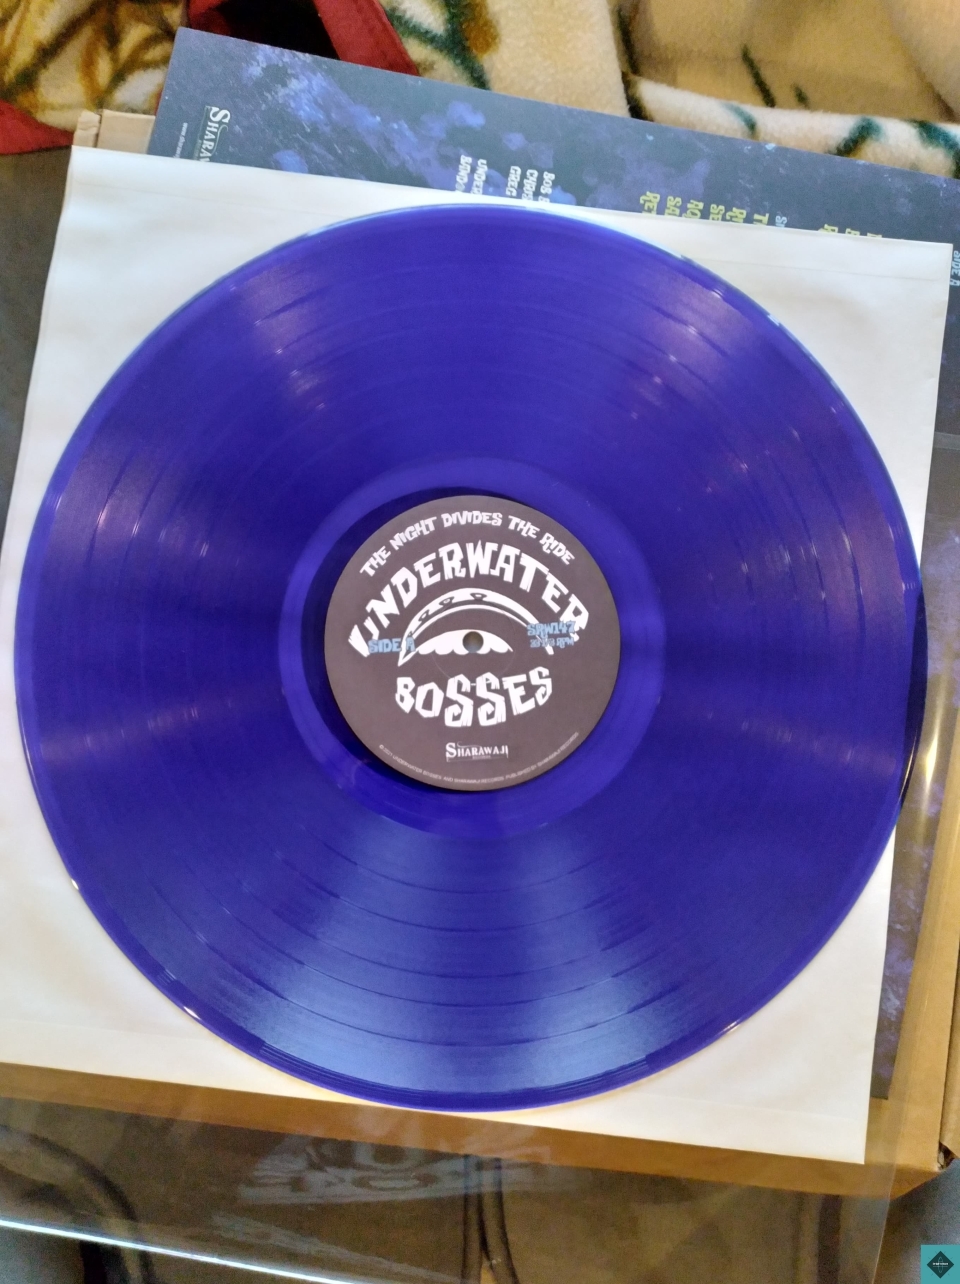 NOW SHIPPING FROM THE USA: The Night Divides the Ride is the second full length album by Underwater Bosses. Recorded in 2020/21 in Syracuse, NY, featuring 12 tracks of high energy instrumental surf. Join the Bosses as they take you along on their journey of the never ending ride. Vinyl, CD and digital download available now. Add it to your collection today - https://underwaterbosses.bandcamp.com/album/the-night-divides-the-ride#underwaterbosses  #sharawajirecords #independentrecordlabel #vinyl #surfvinyl #surfmusic #horrorsurf #instrumental #monstromental #surfrock #syracuse #fender #fenderstratocaster #stratocaster  #surf #instro #reverb #twang